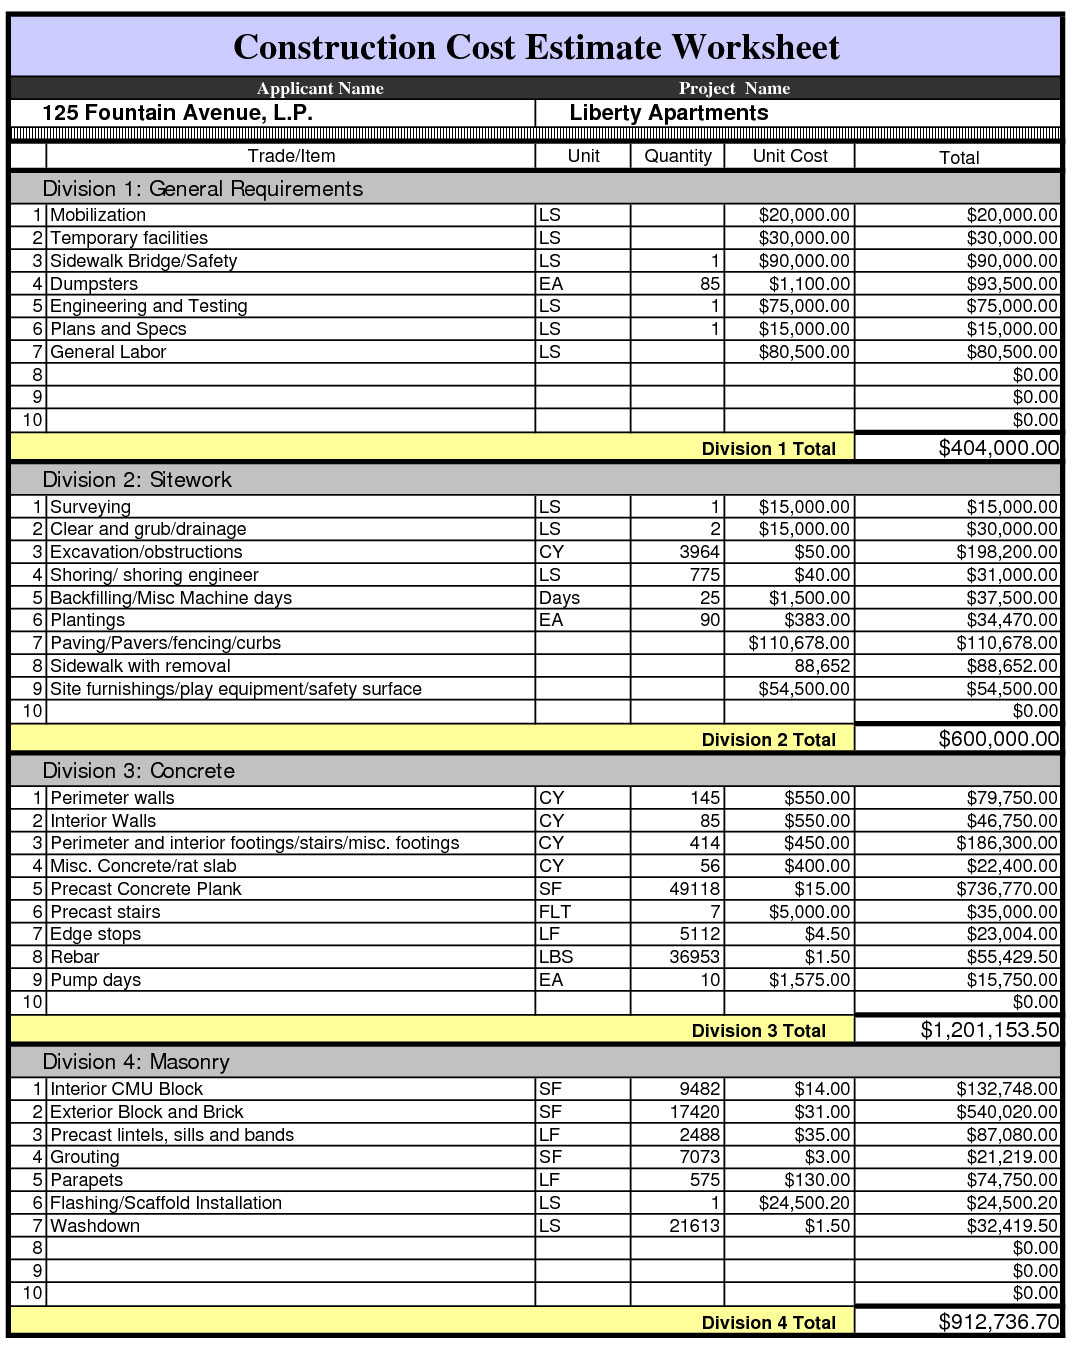 Construction Cost Breakdown Spreadsheet With Construction Cost Estimate Worksheet